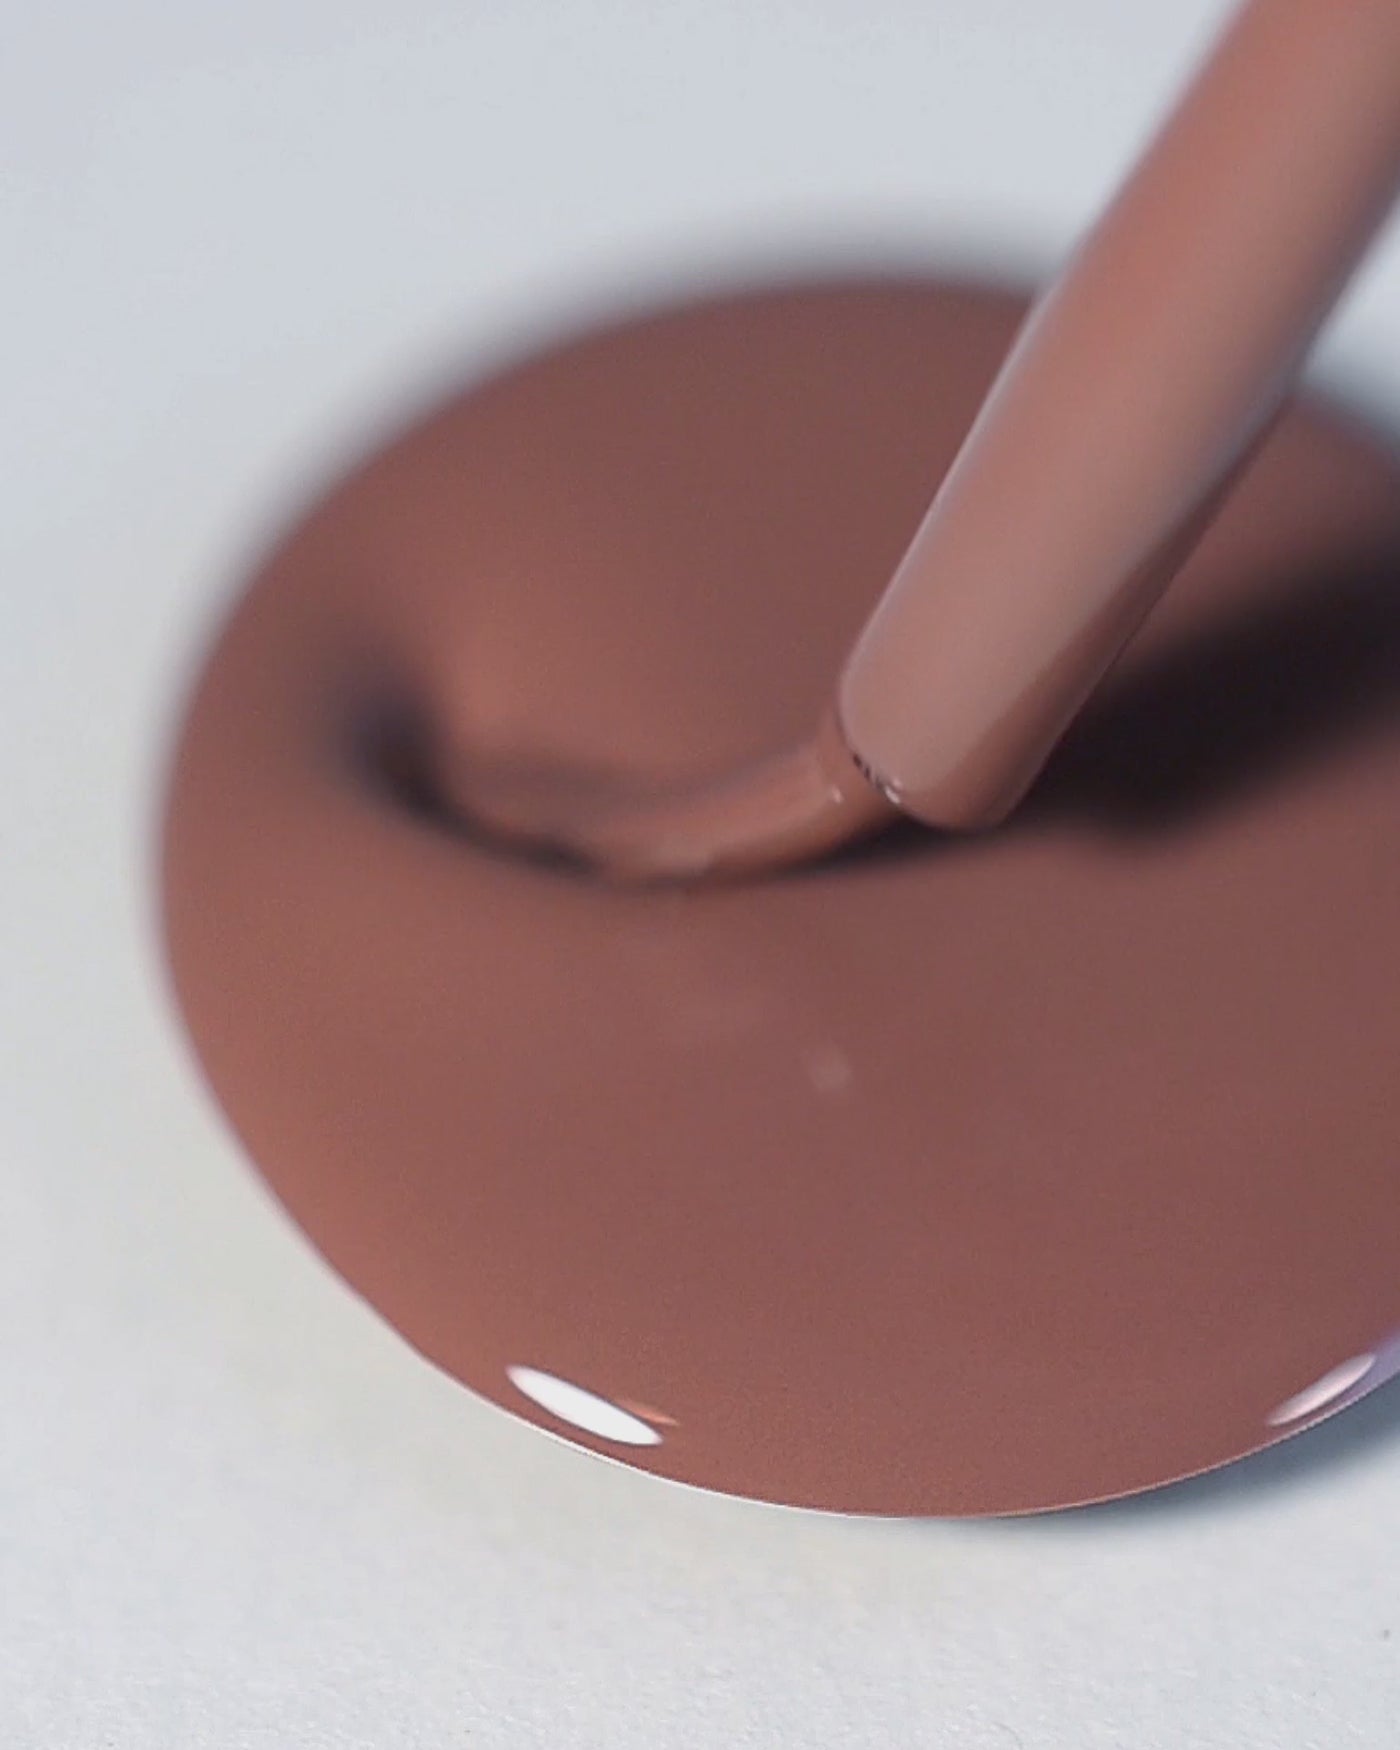 A nail polish swirl of Grounded mylk chocolate crème by Sienna Byron Bay close-up.